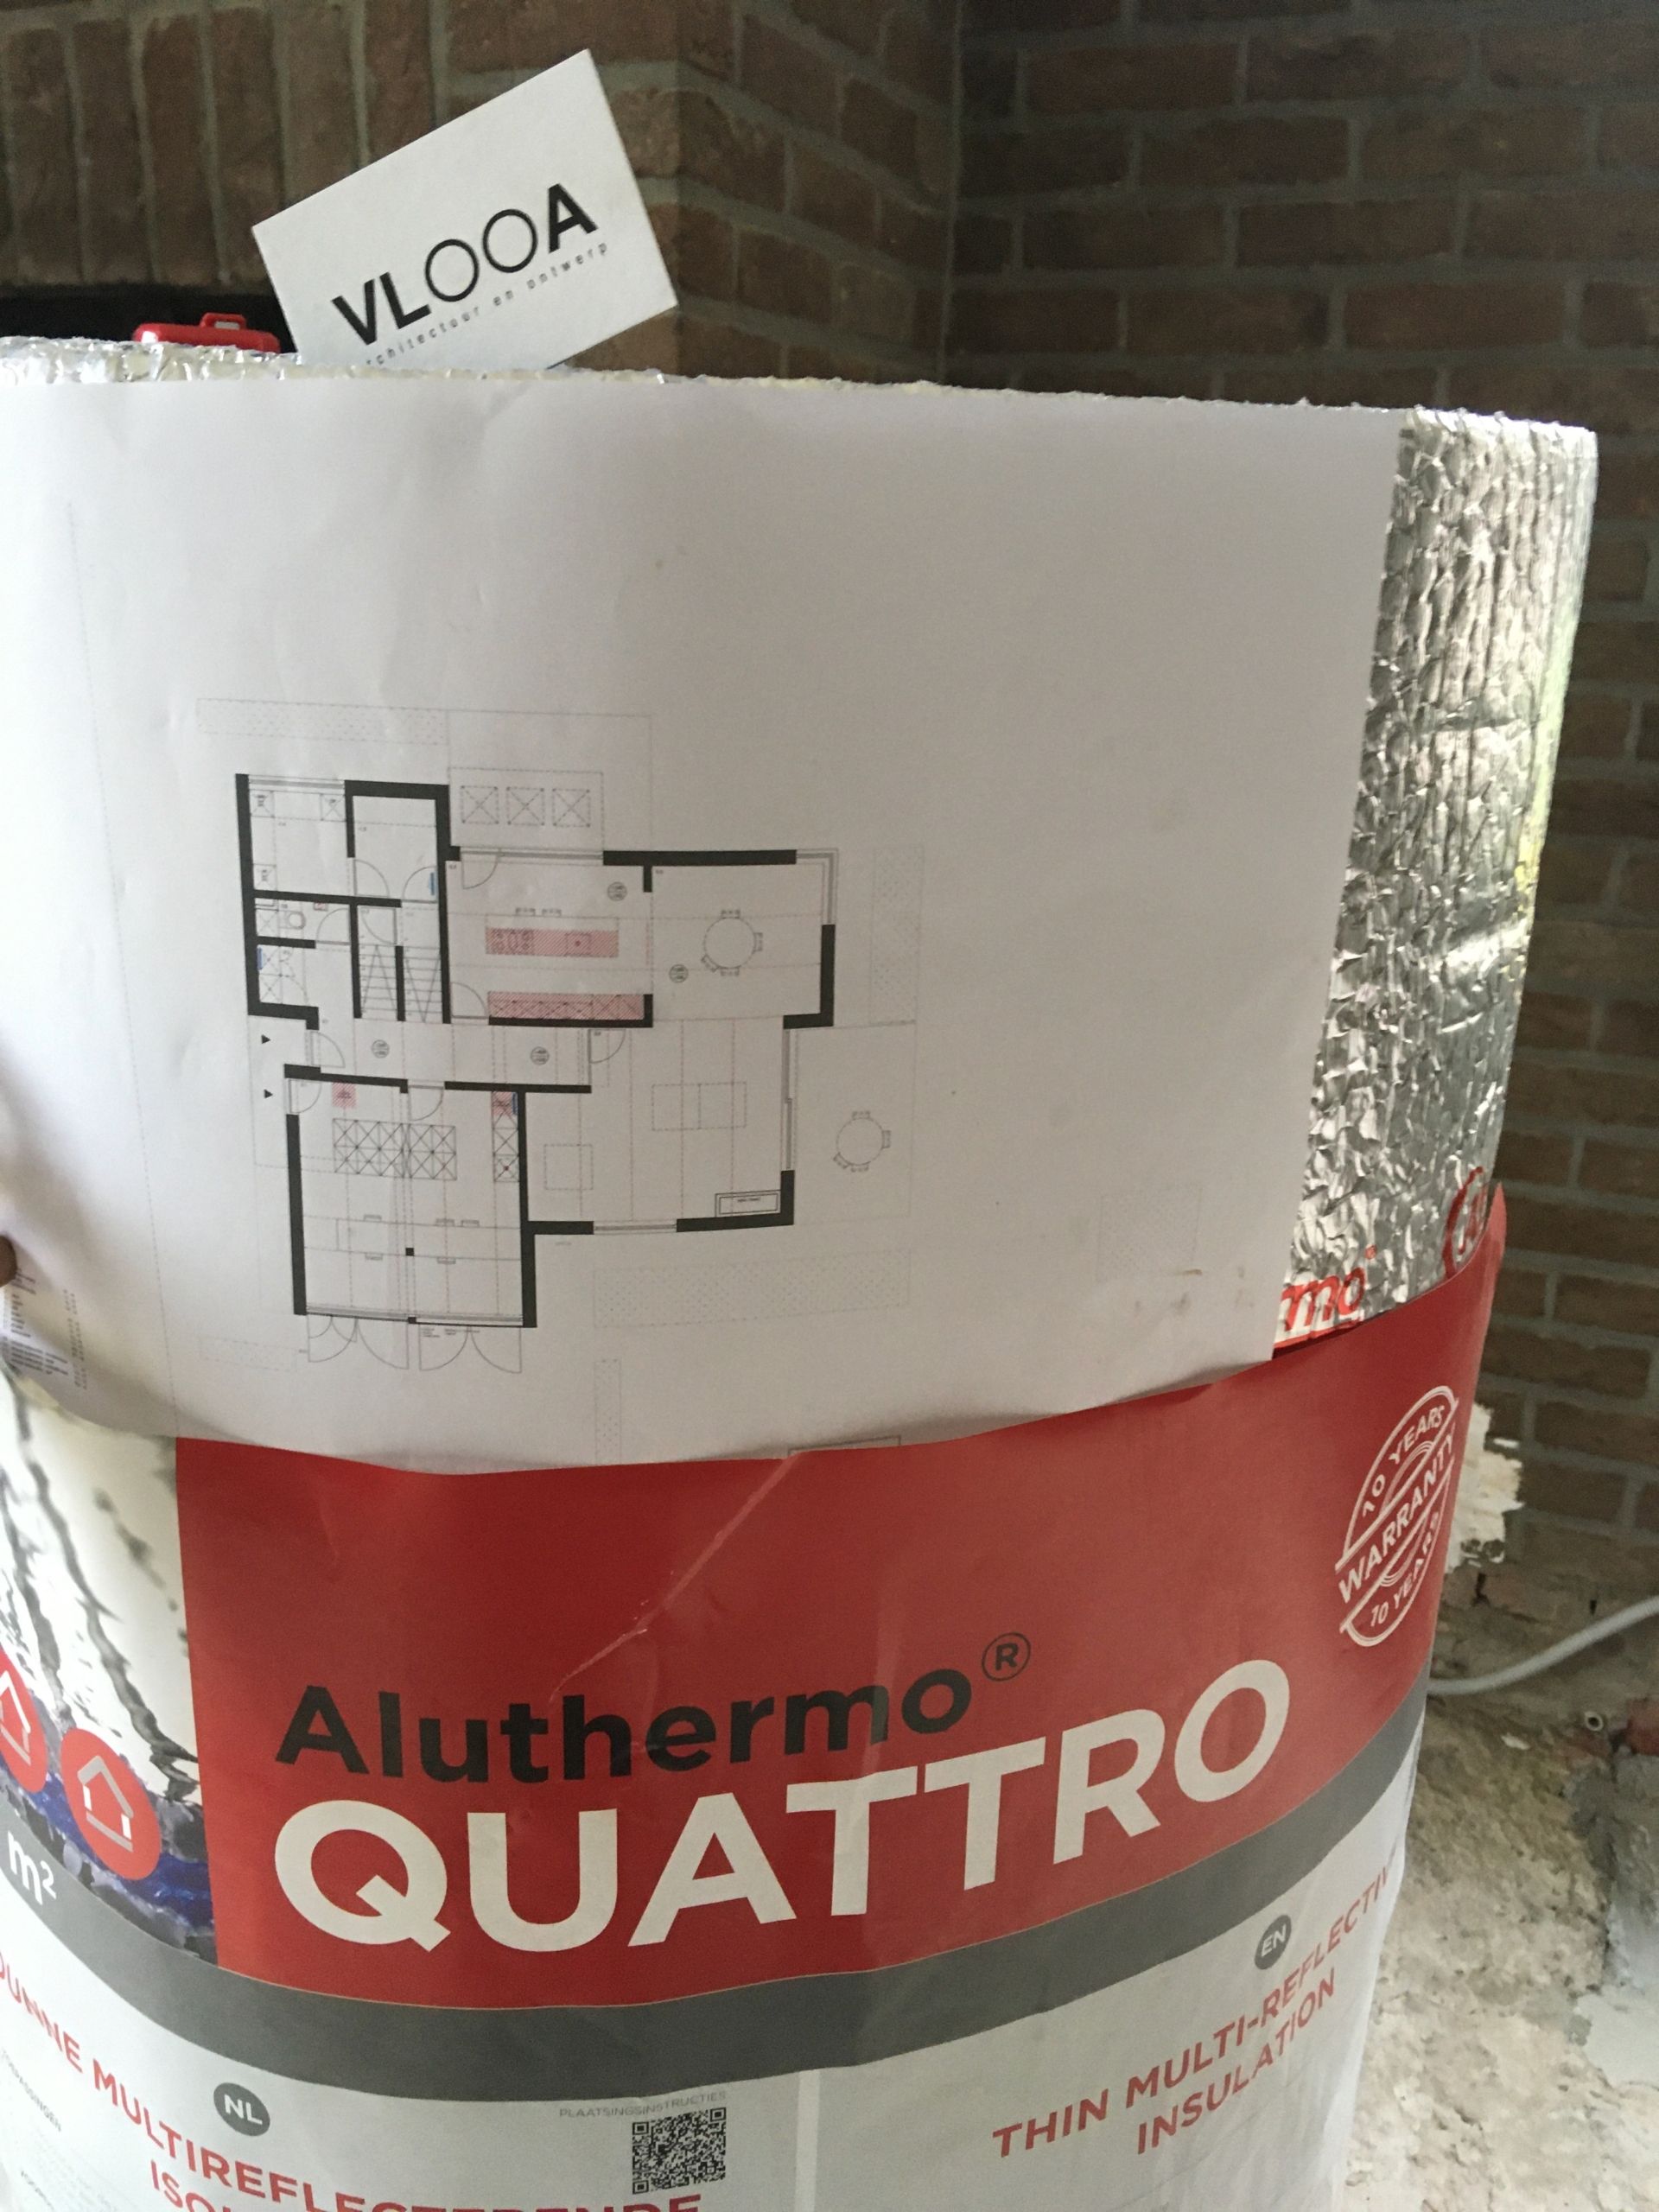 Aluthermo Quattro dunne vloerisolatie isolation mince pour sol VLOOA scaled